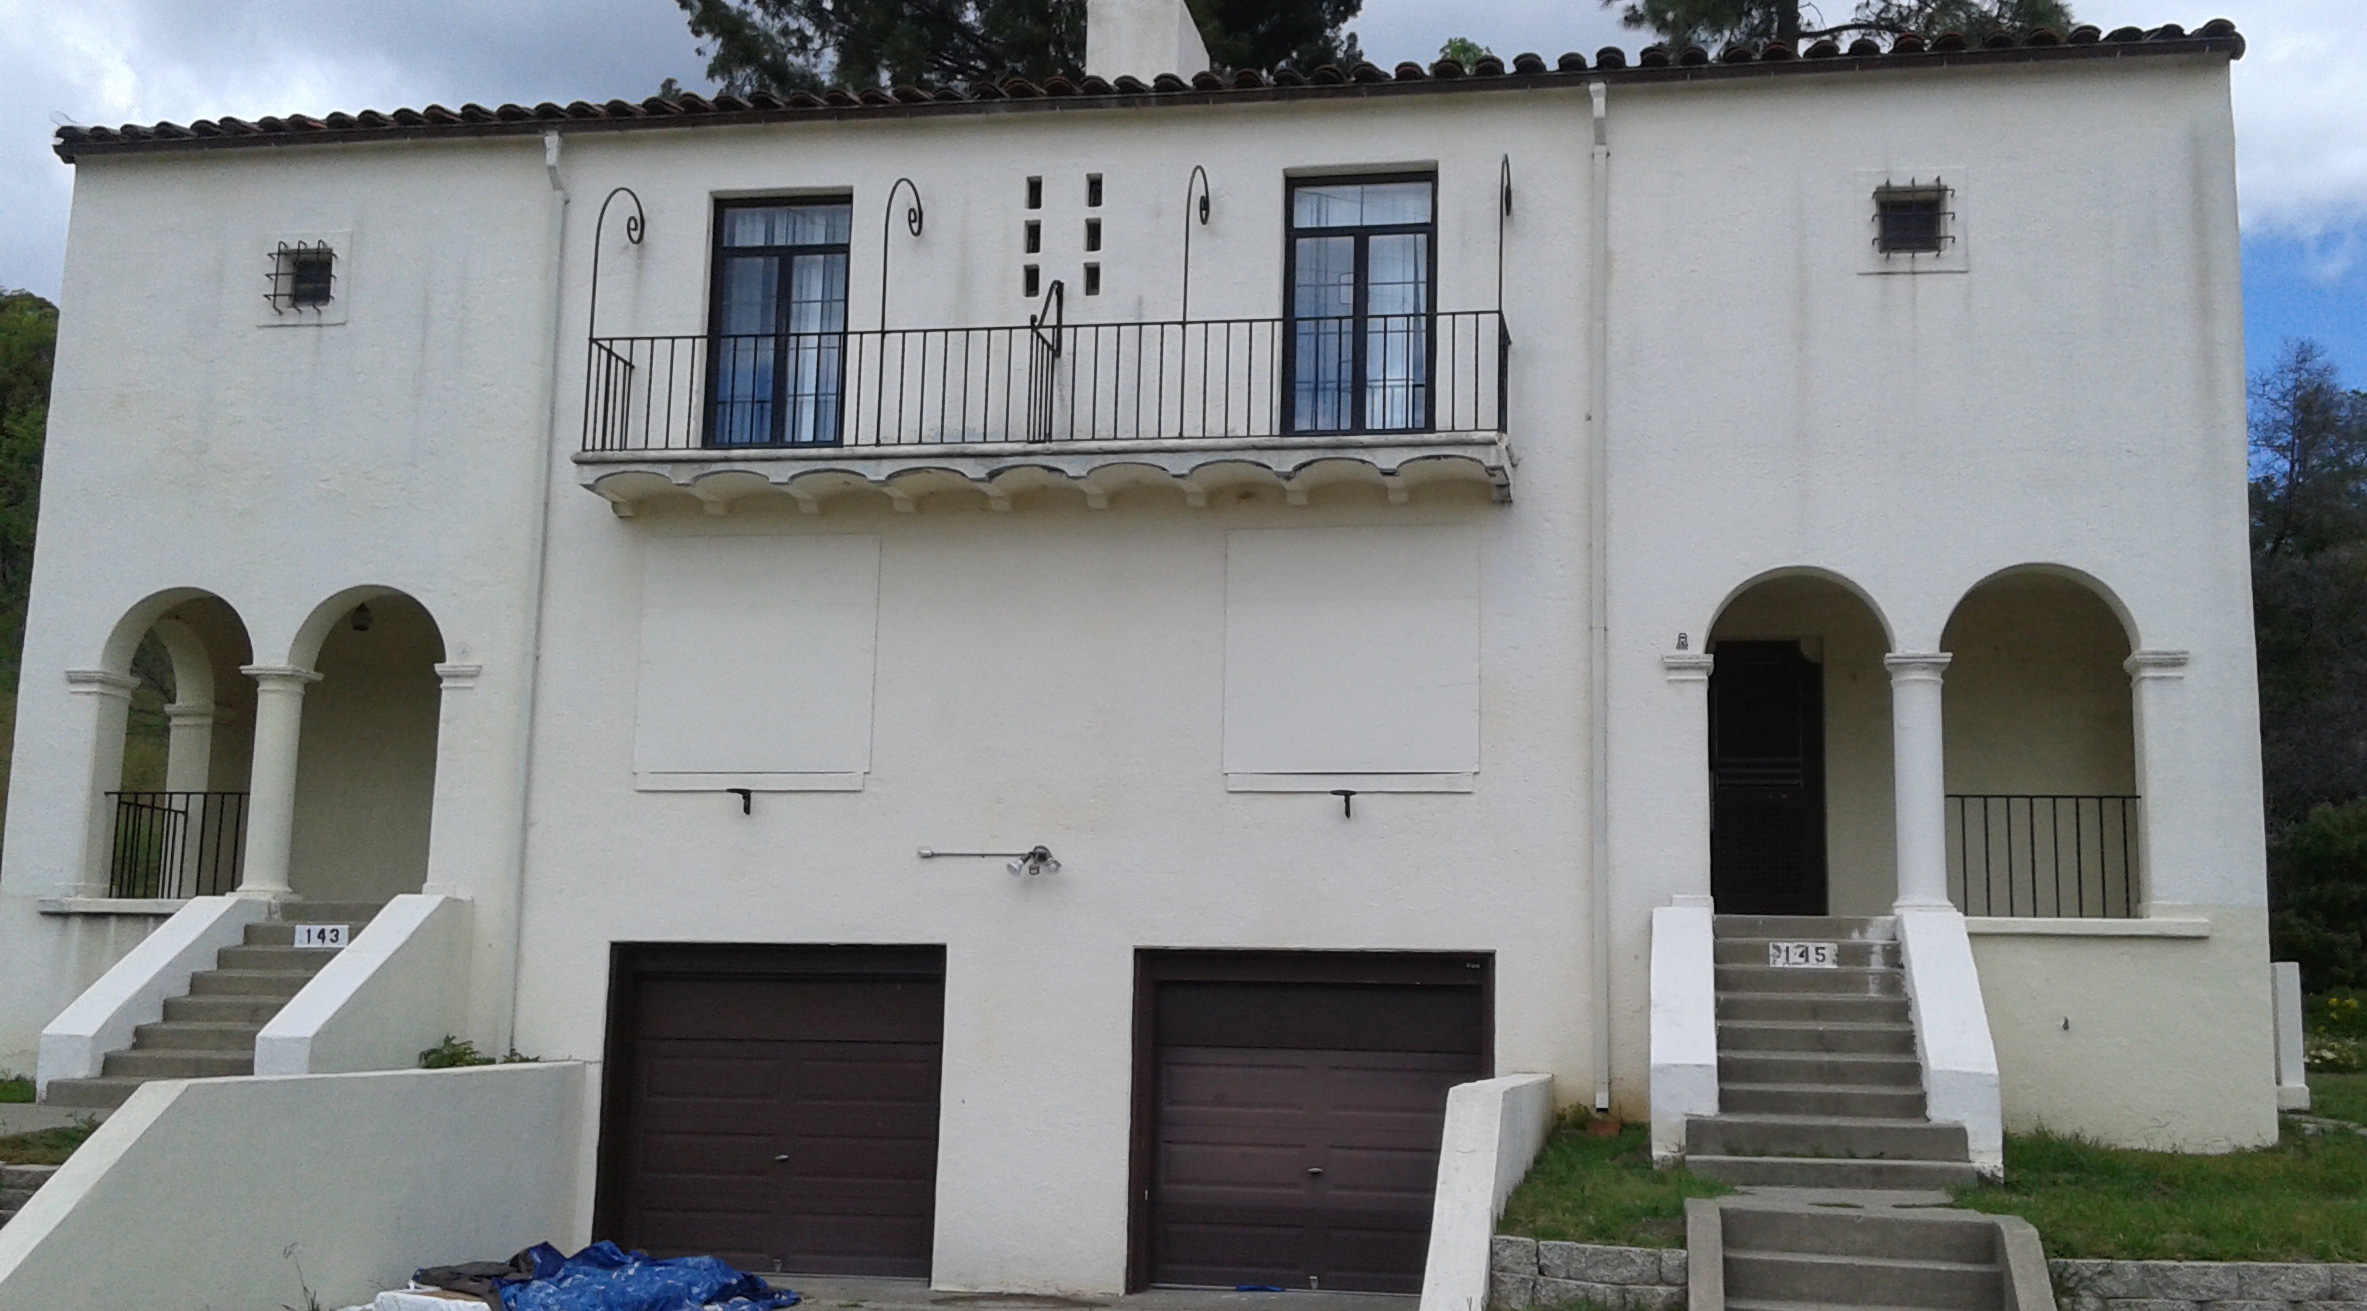 The San Francisco Bay Area's Vacant Homes of Mystery